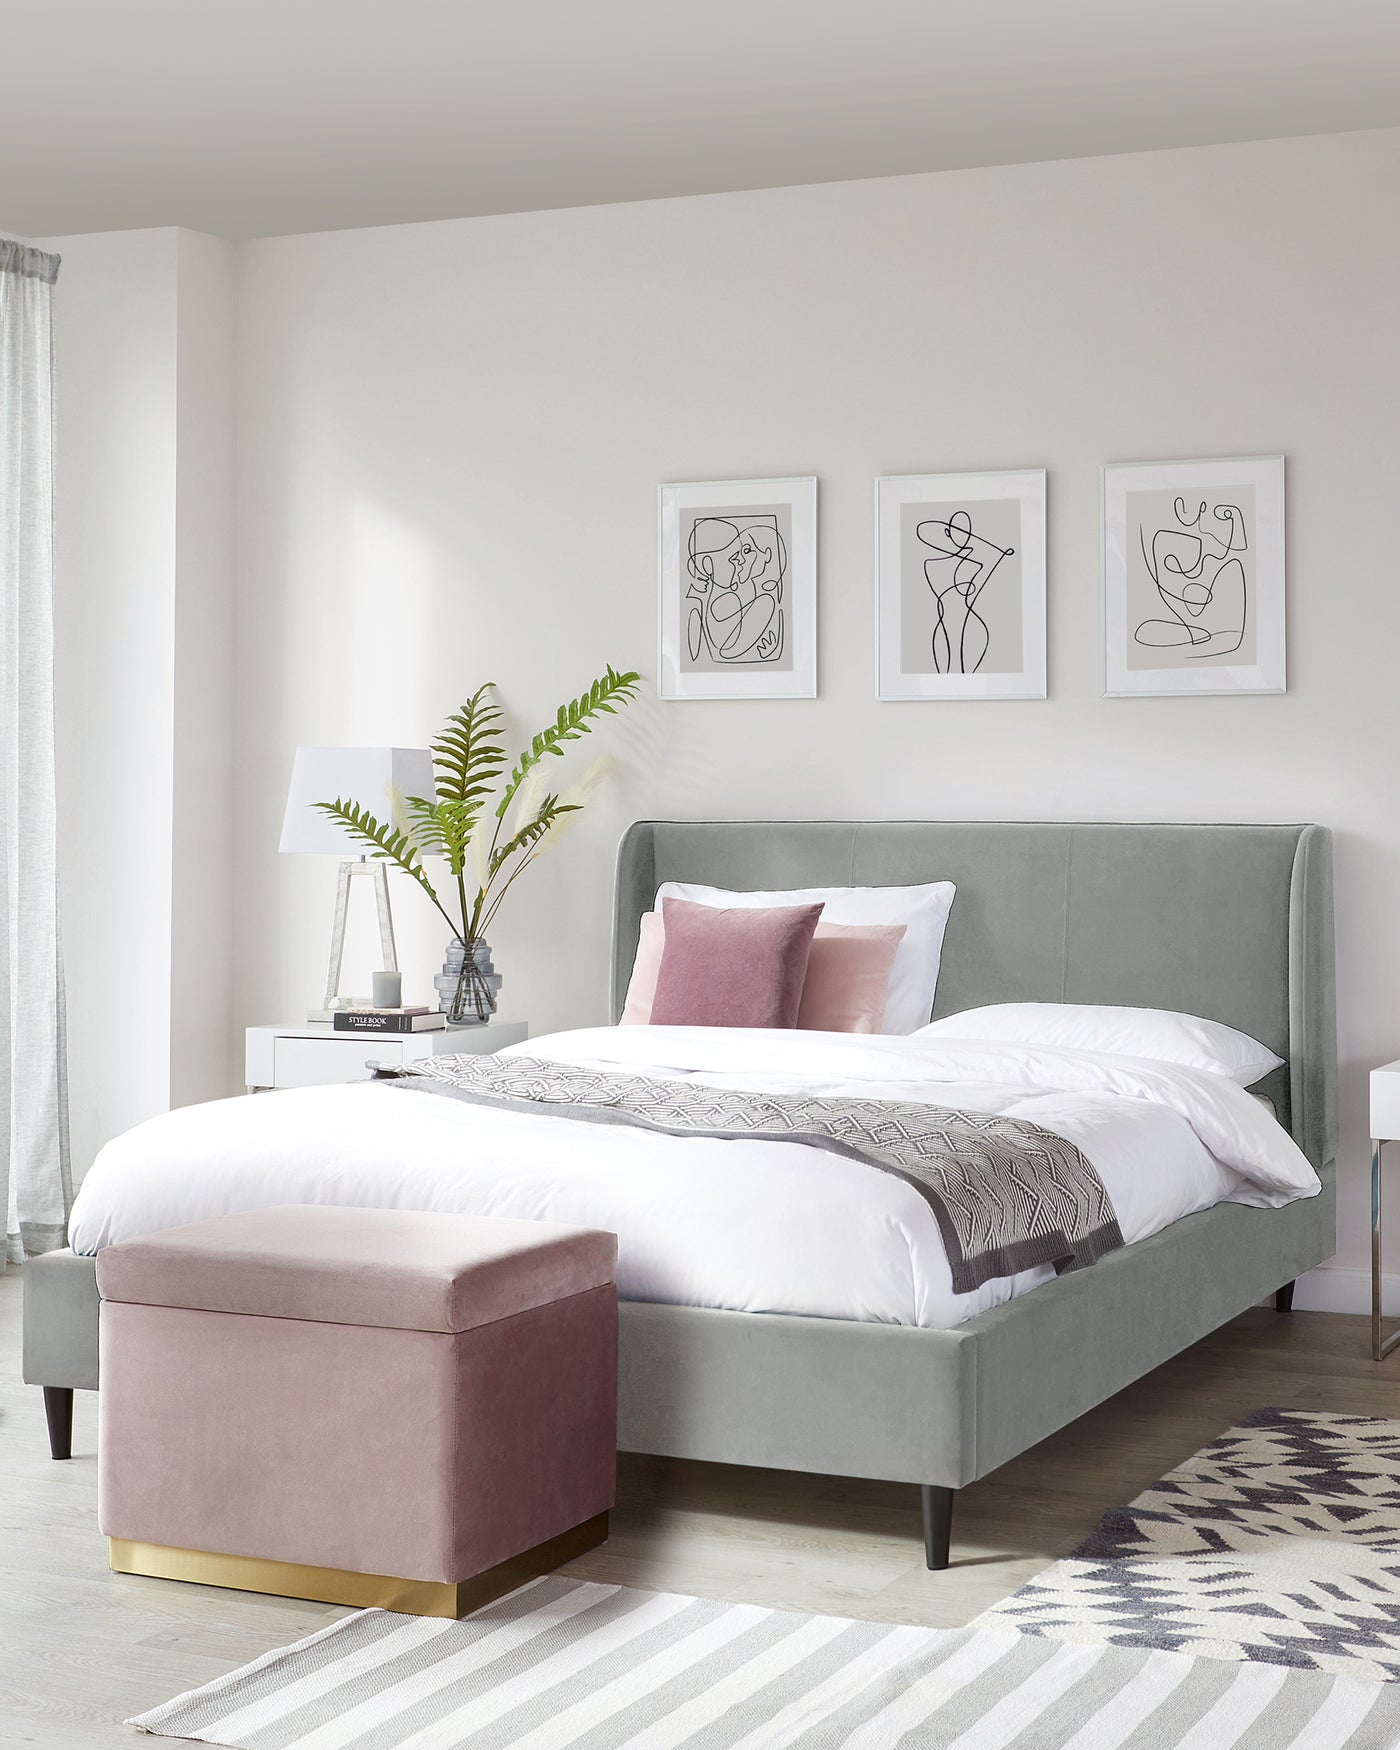 A contemporary styled bedroom featuring a grey upholstered bed with a high headboard, accompanied by a plush, dusty rose-pink storage ottoman with a gold metal base. The bed is dressed in white and patterned bedding, and a modern white nightstand with a table lamp and decorative elements completes the scene. The floor is adorned with a geometric patterned area rug with a complementing colour scheme, set against the backdrop of a neutral-toned room with framed abstract artwork on the wall.